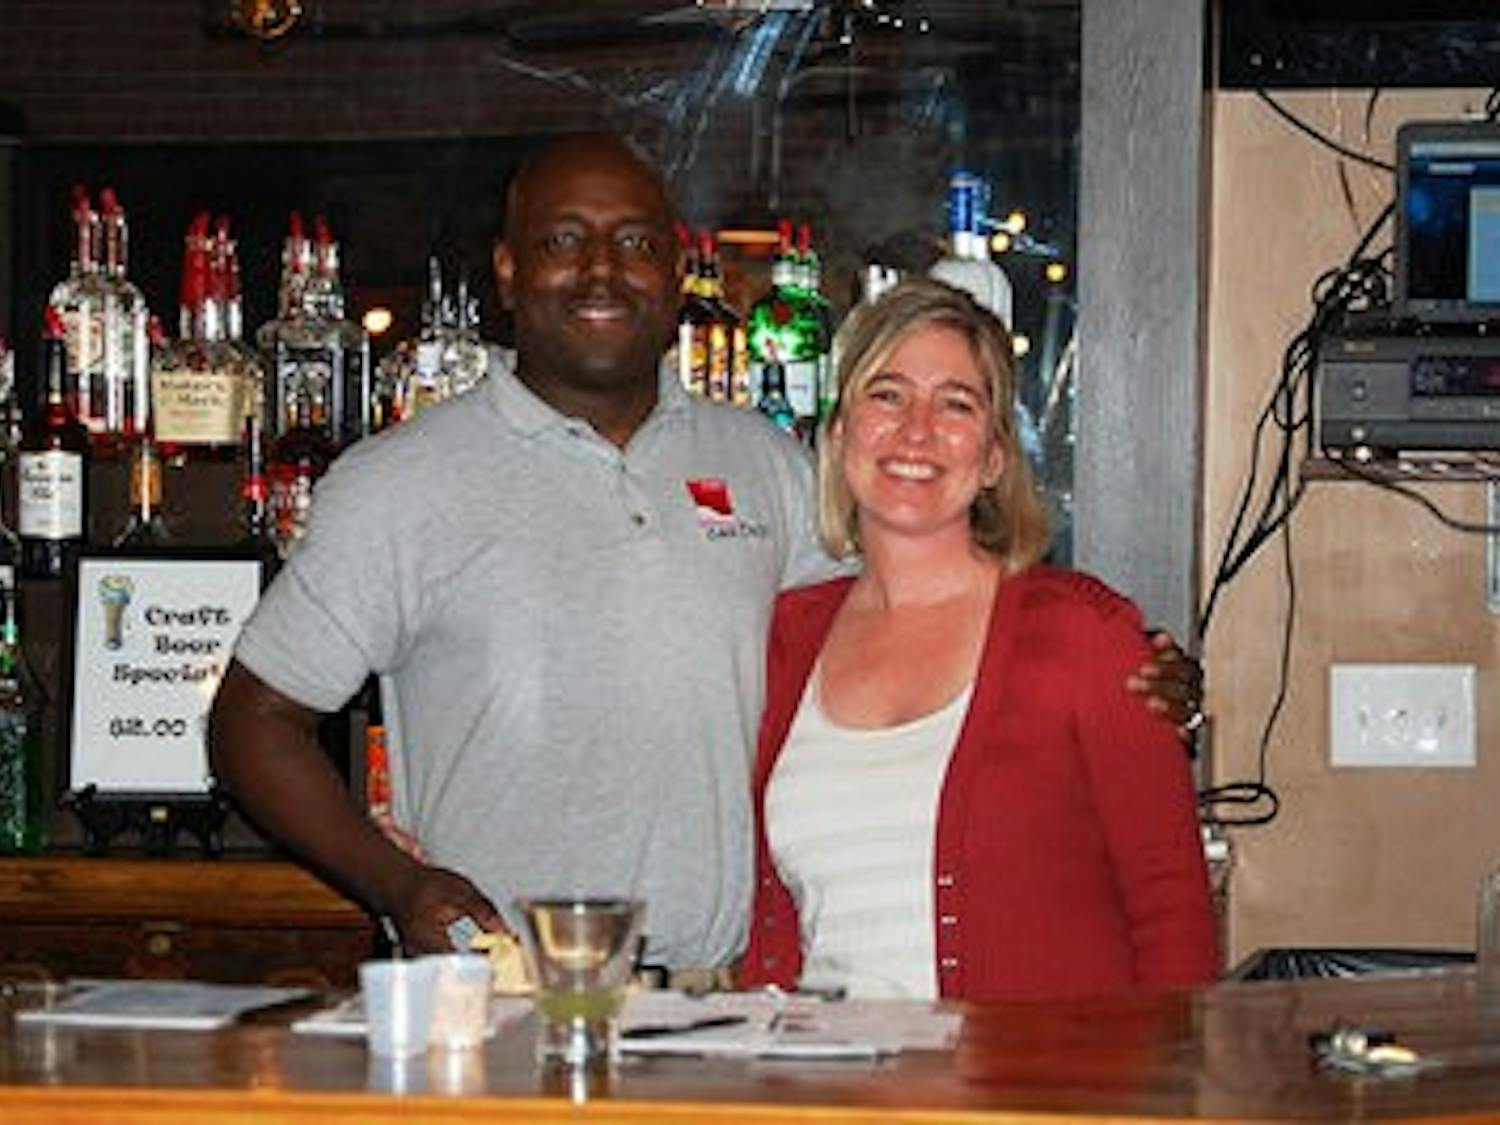 Lisa Ditchkoff and Clemon "Bird man" Byrd stand behind the bar at the Event Center Downtown.